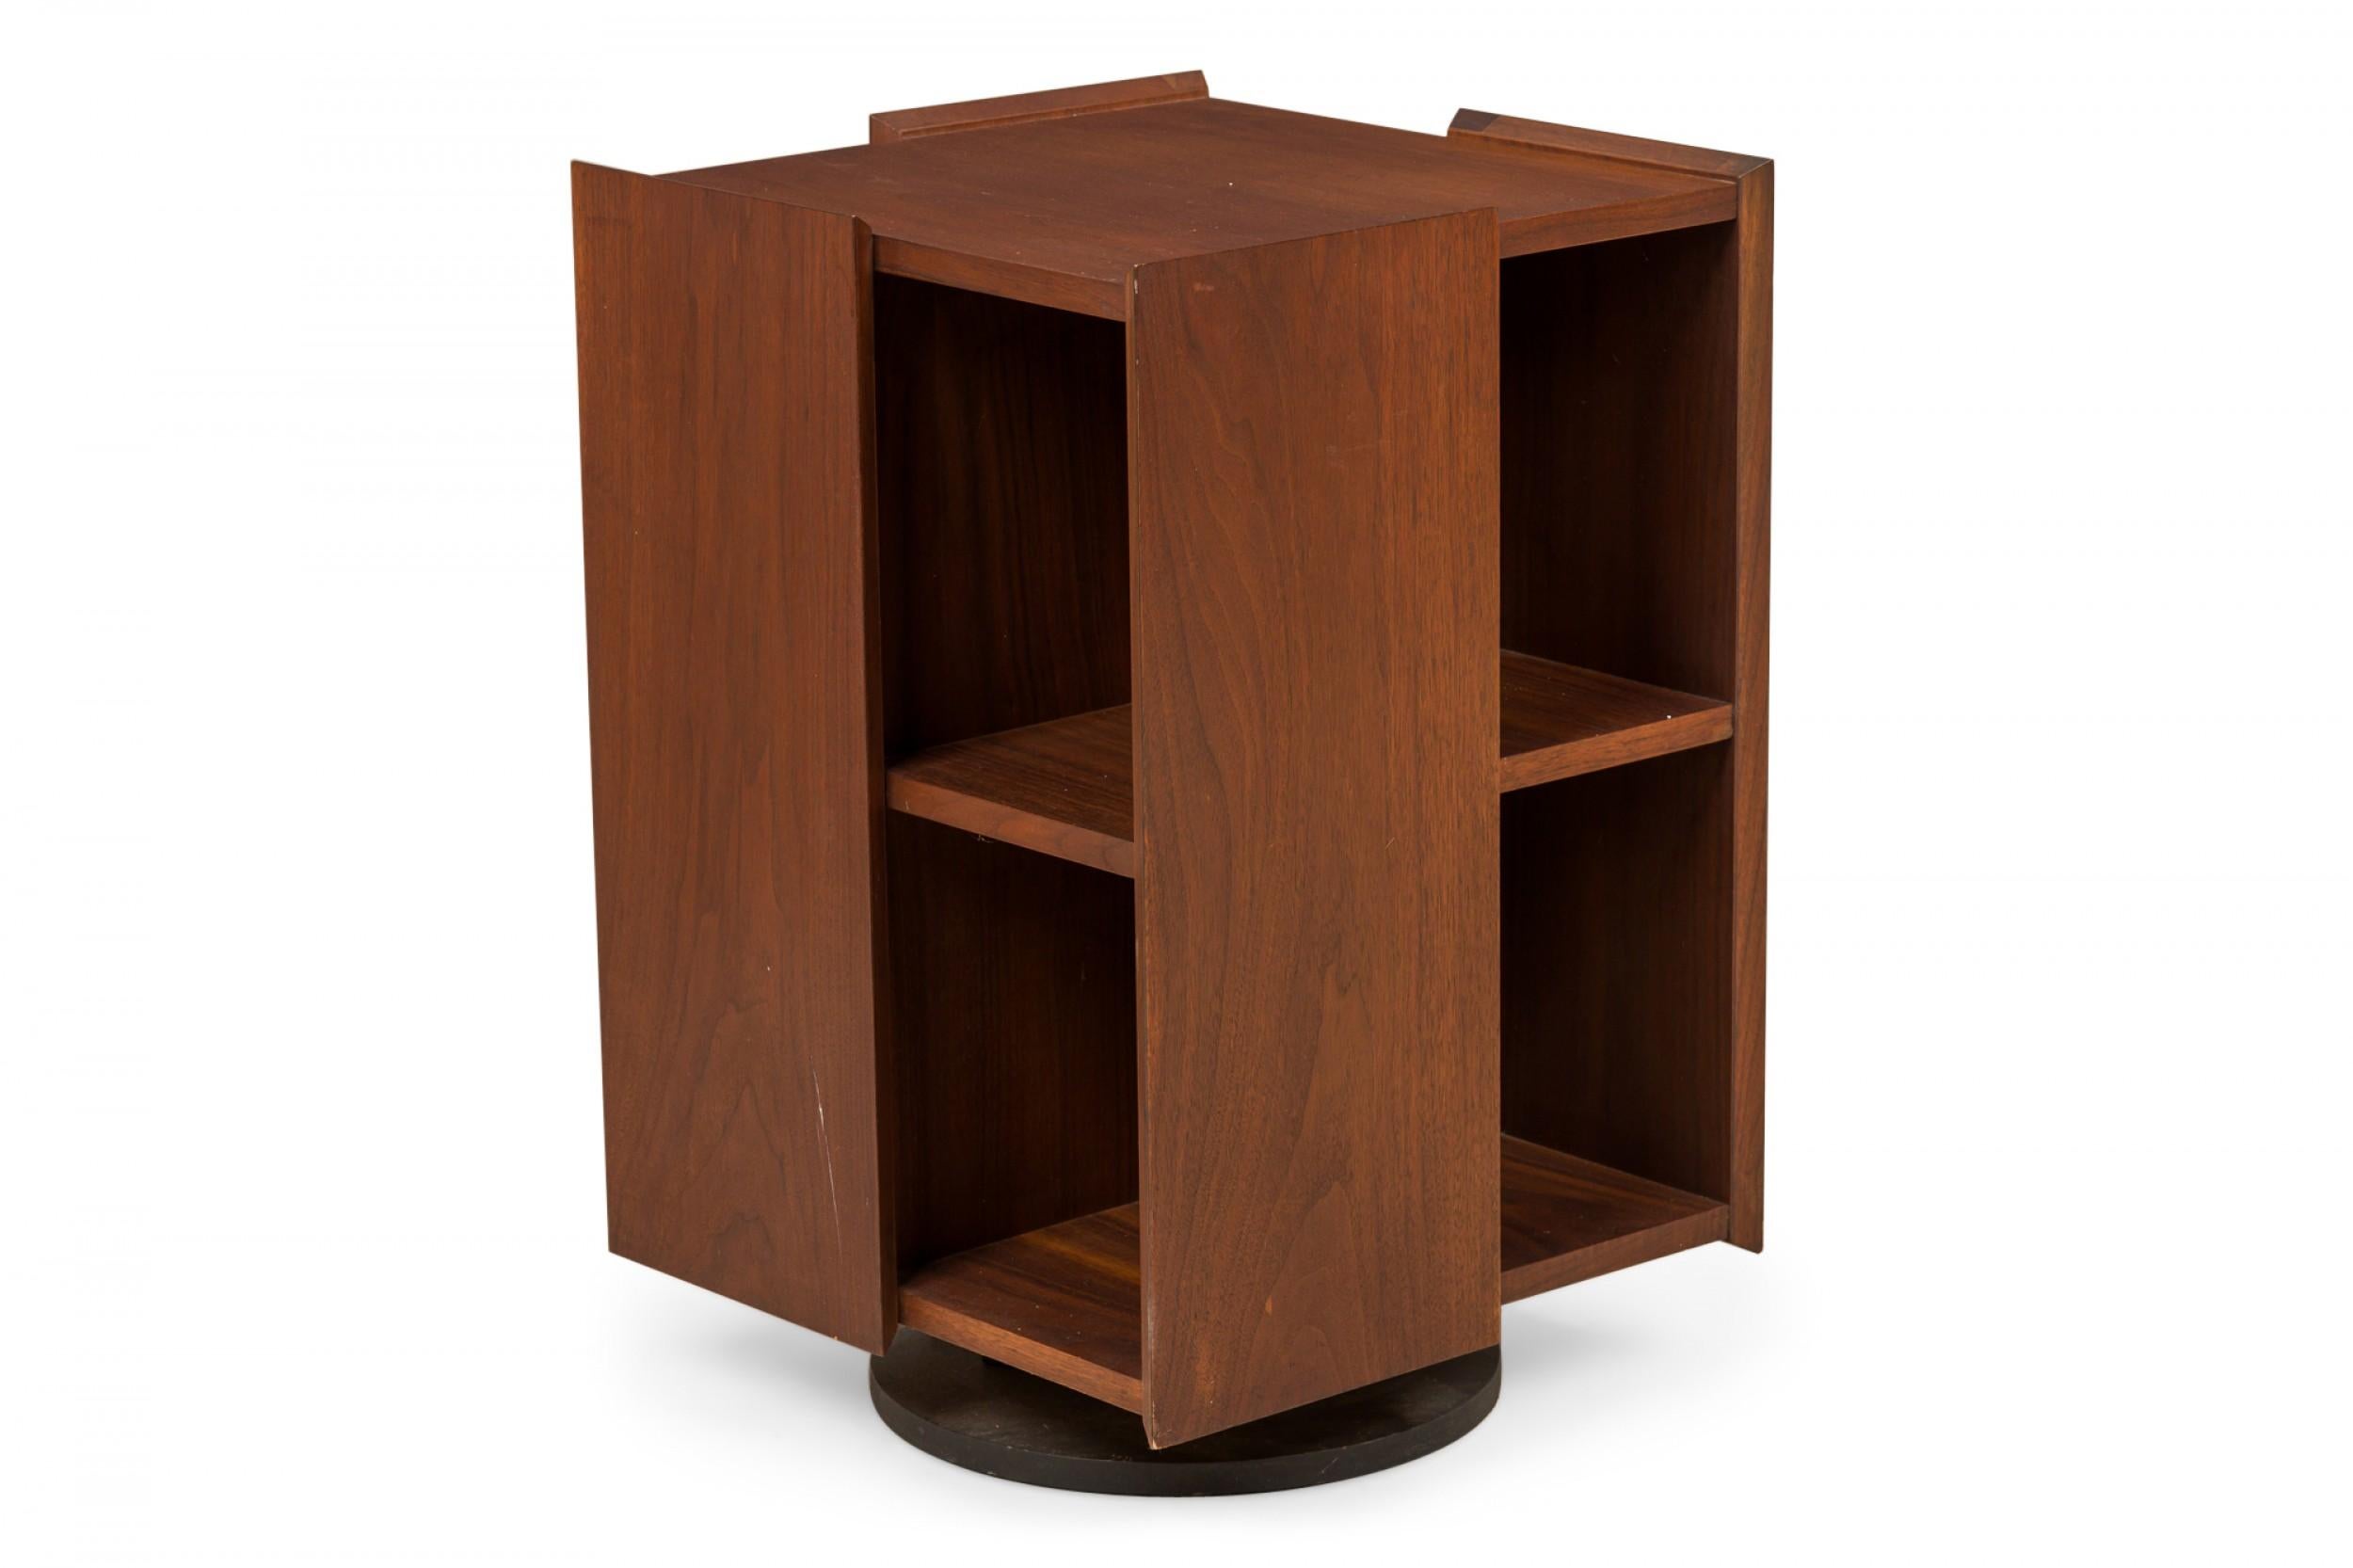 American mid-century walnut lazy susan mini-bookcase with a rectangular form of alternating panels and two compartment shelves on each side, on a fully rotational plinth base. (FOUNDERS)